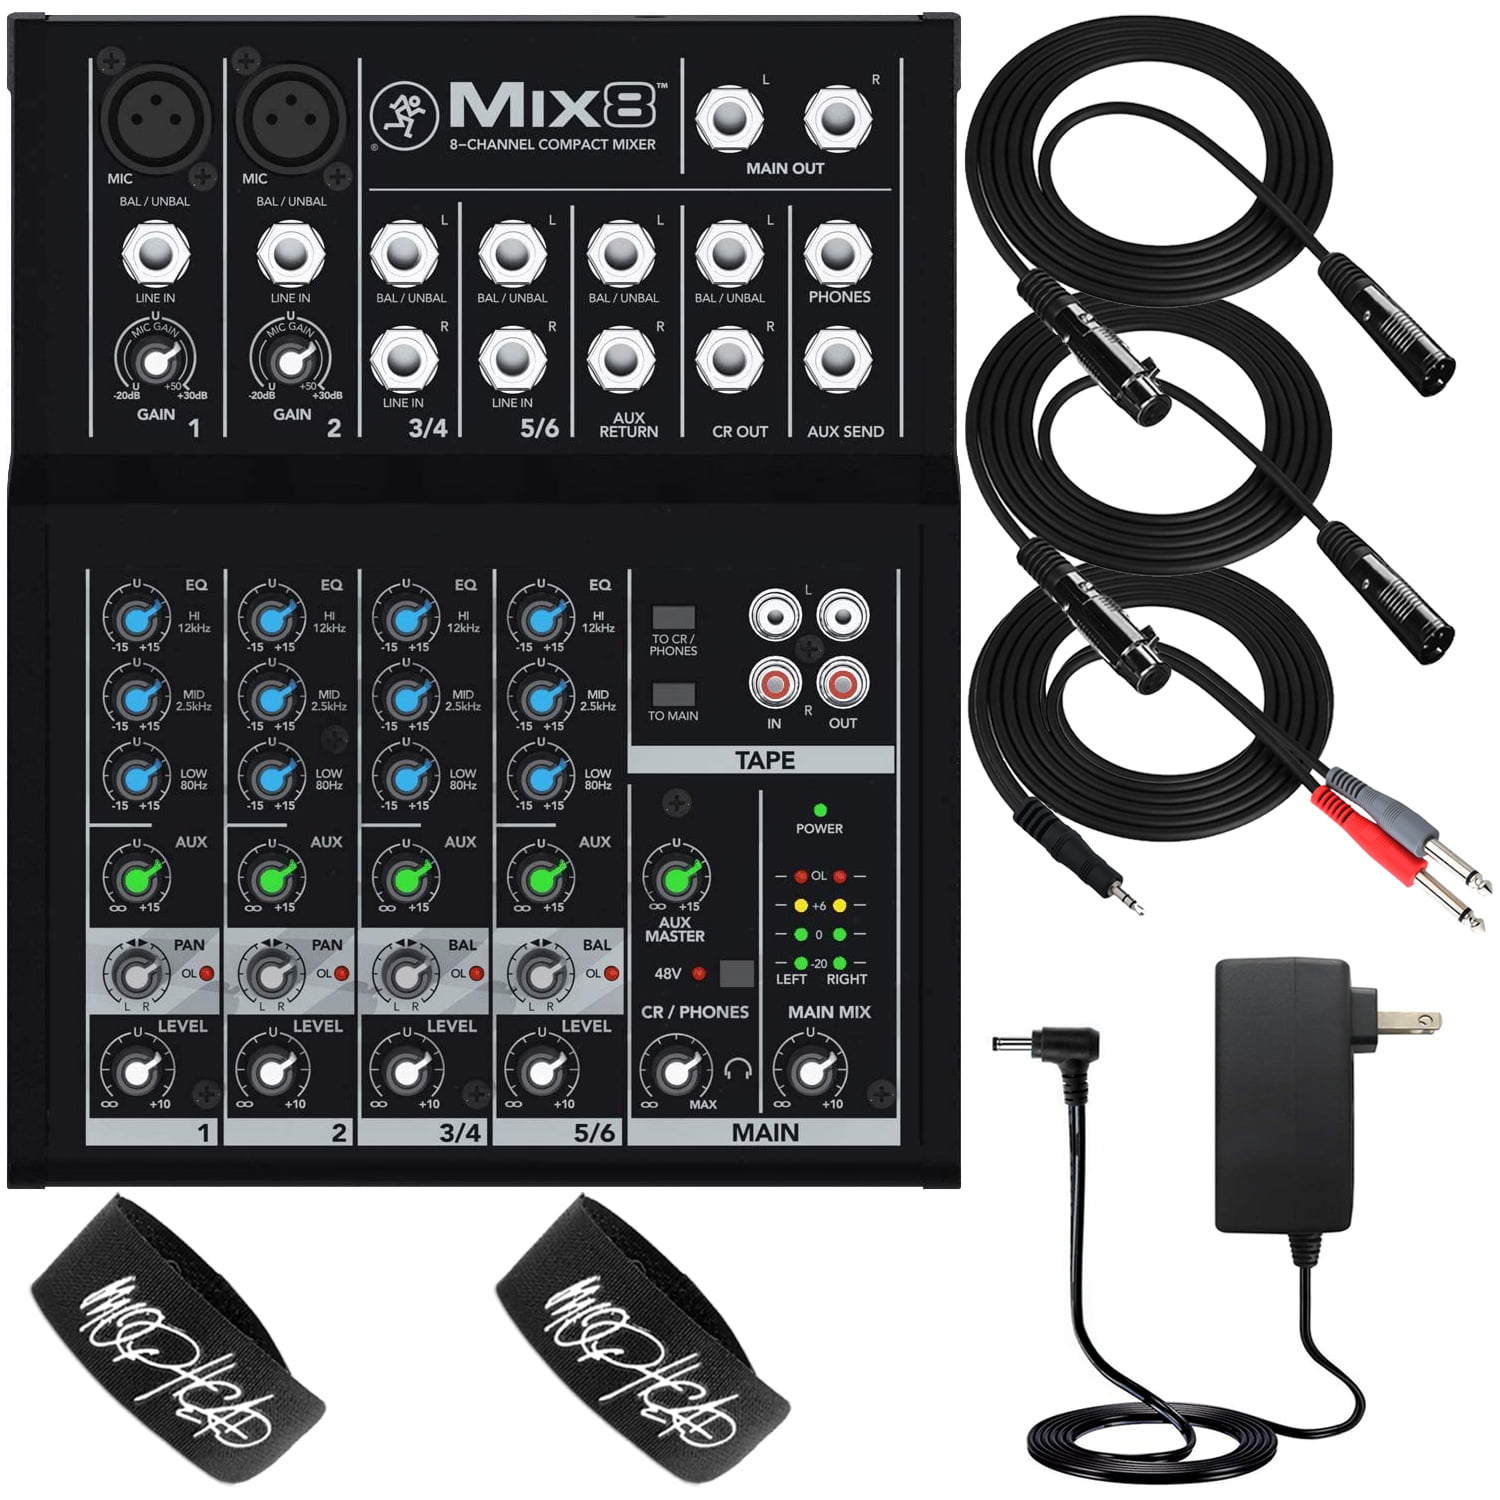 Compact Mixer Constructed w/Durable Metal Chasis+2 XLR Cables Mackie Mix8 8 Ch 